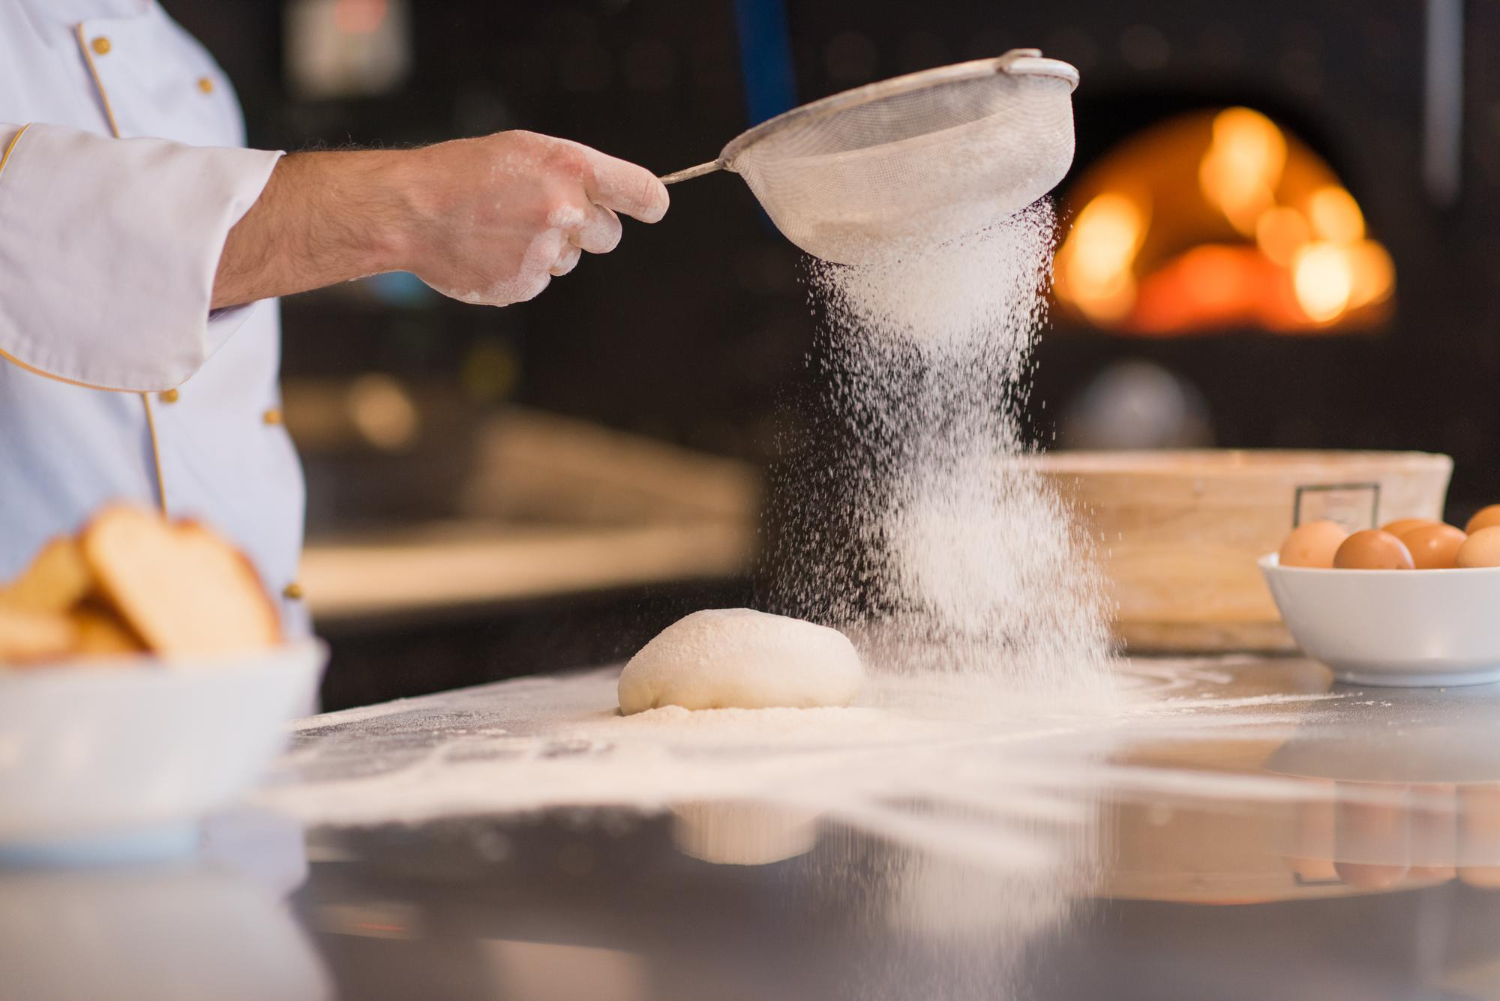 A chef sprinkles flour from a mesh shifter over a ball of bread dough on a stainless steel countertop.